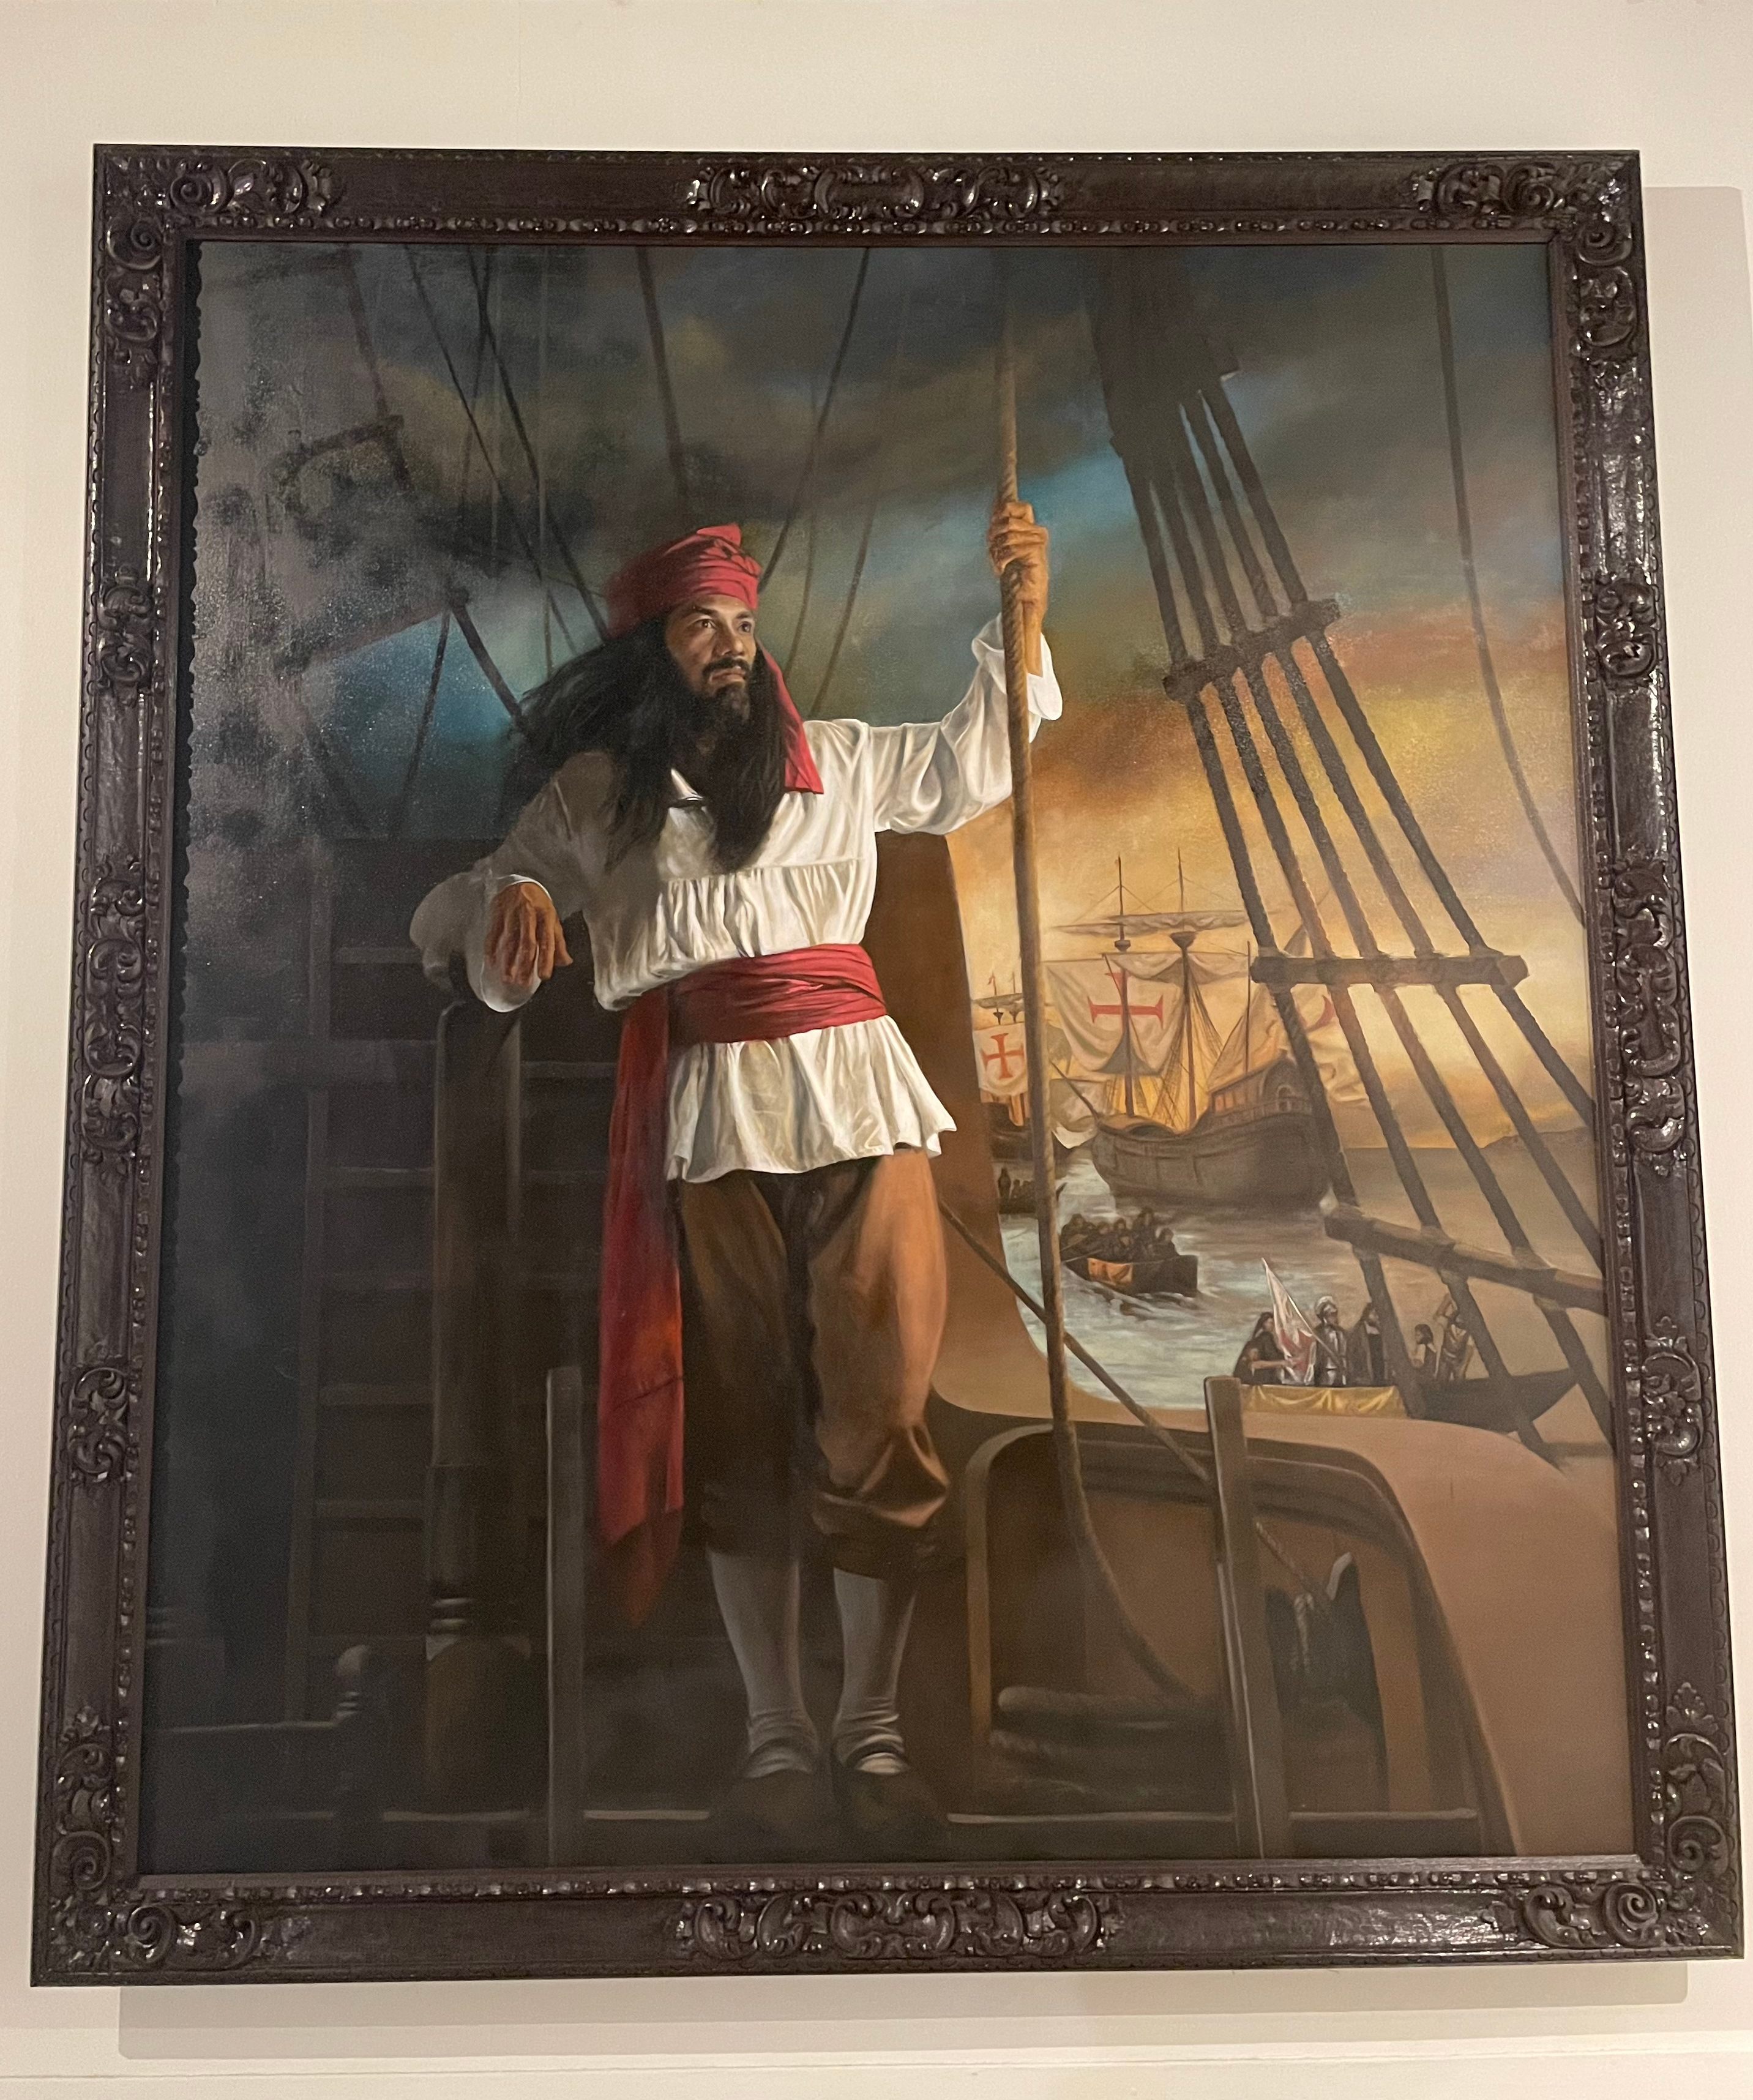 Enrique had a long, ten-year journey sailing as an enslaved man captured by Magellan.